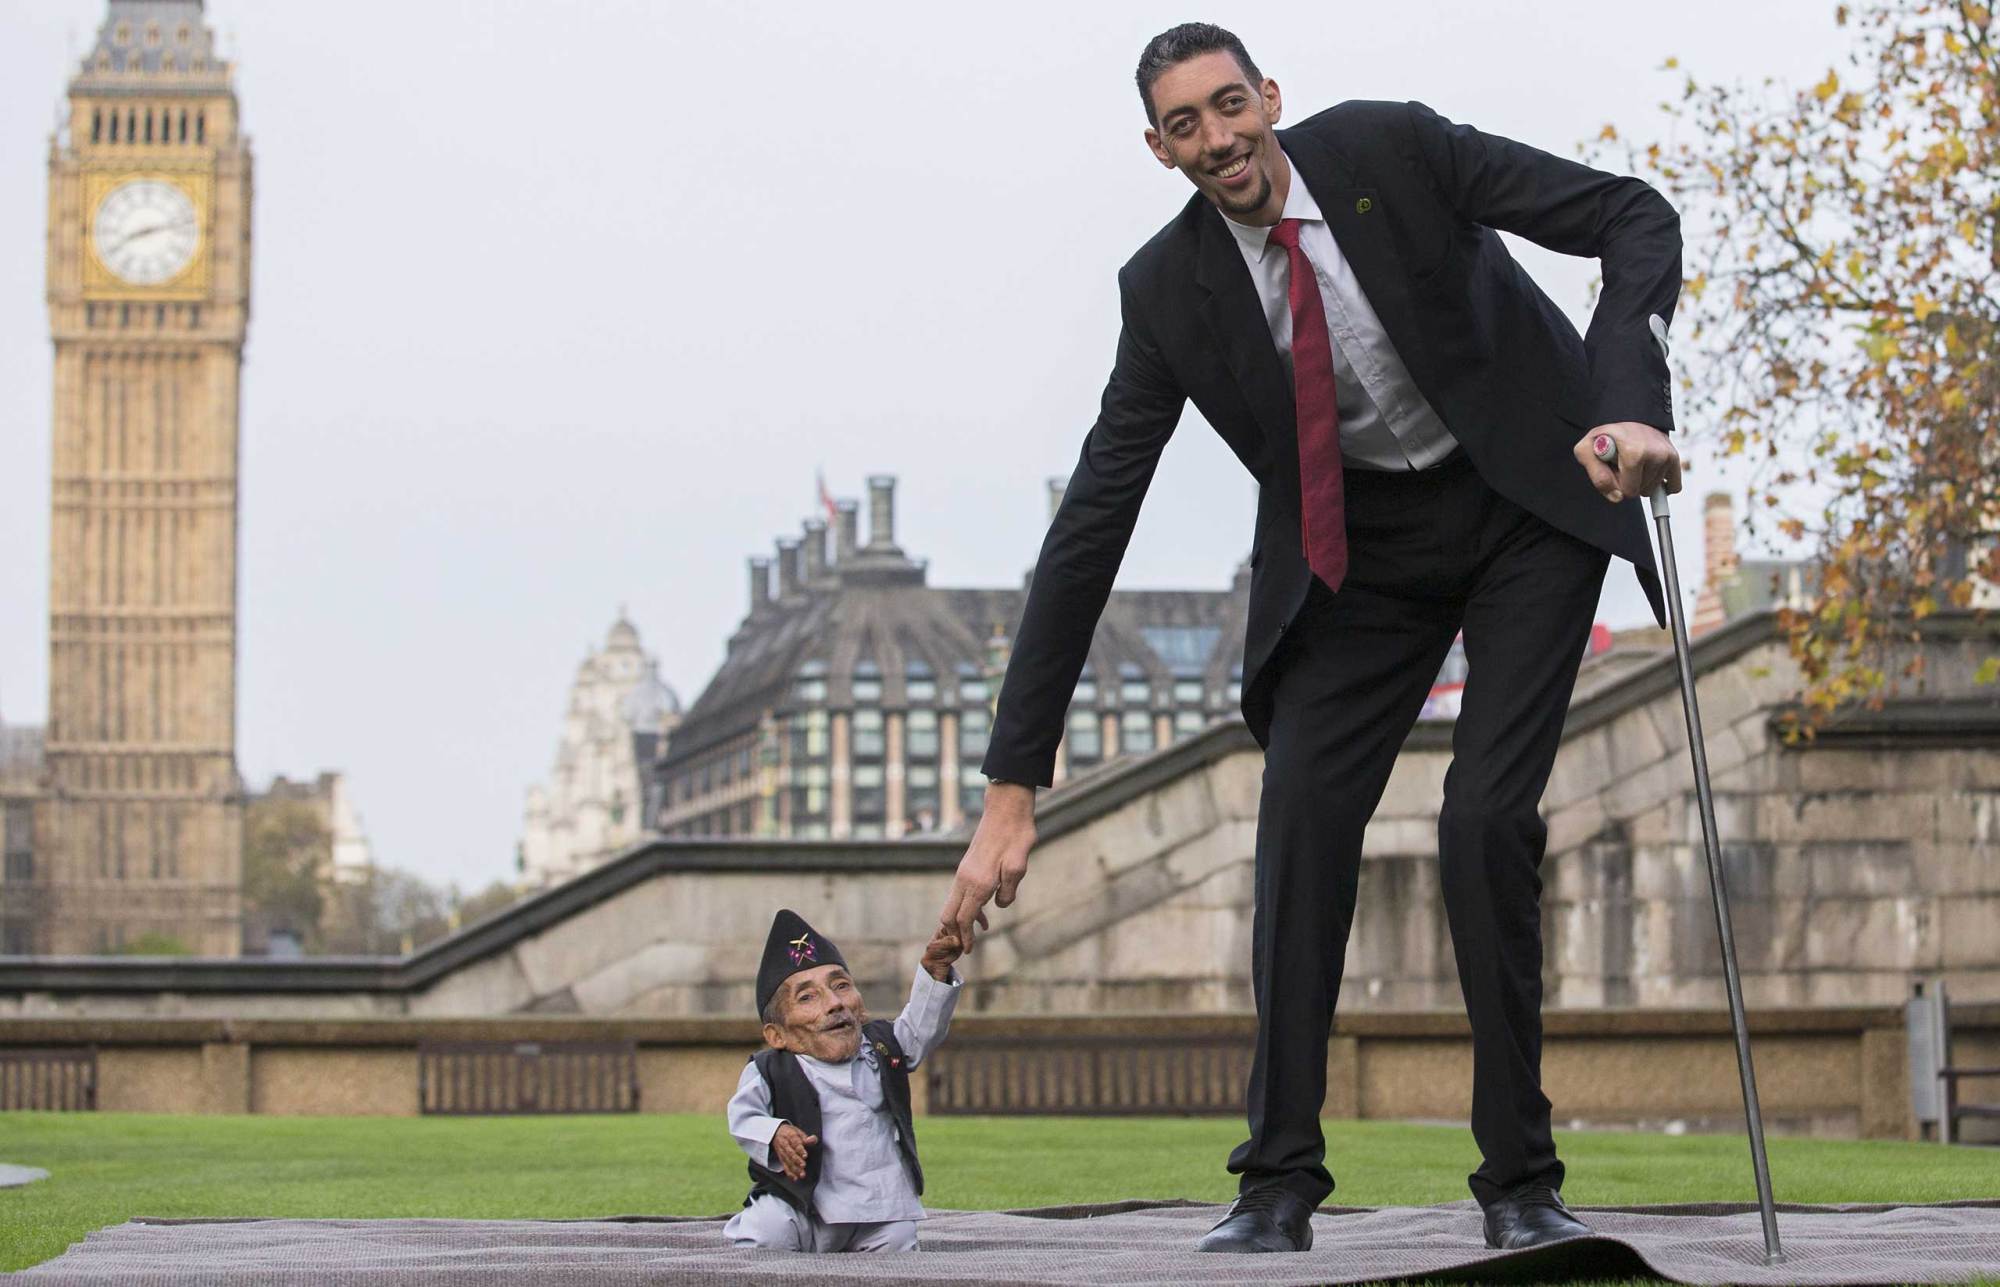 tallest-and-shortest-men-in-the-world-met-together-in-london